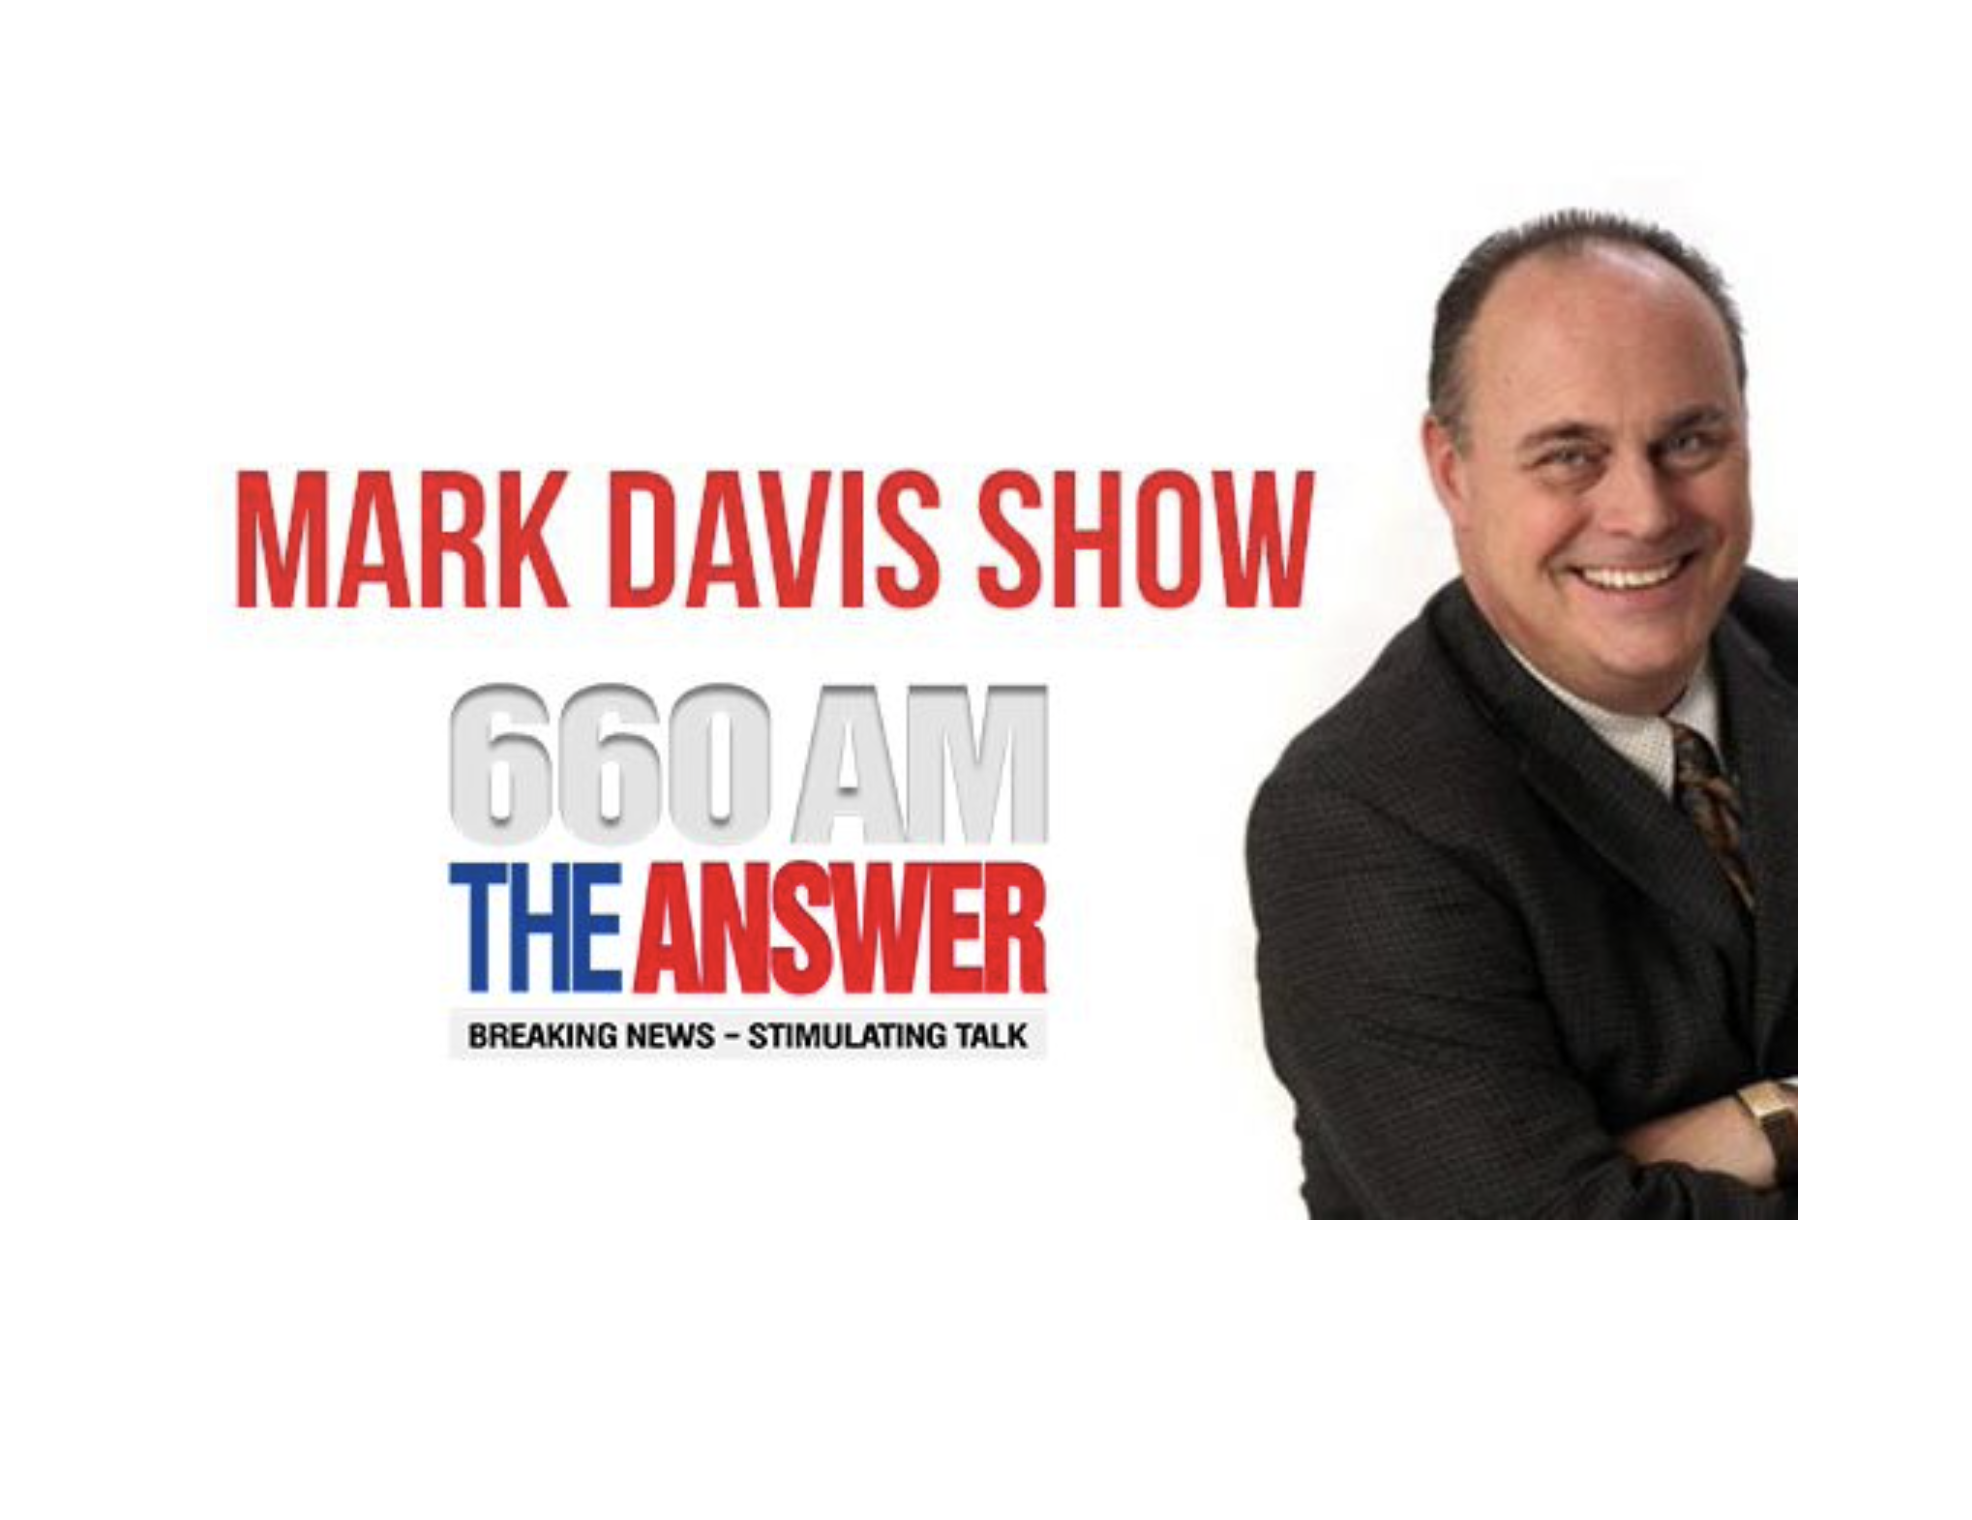 On the Mark Davis Show: To Discuss ‘Excess Votes’ in Critical Swing States During 2020 Election